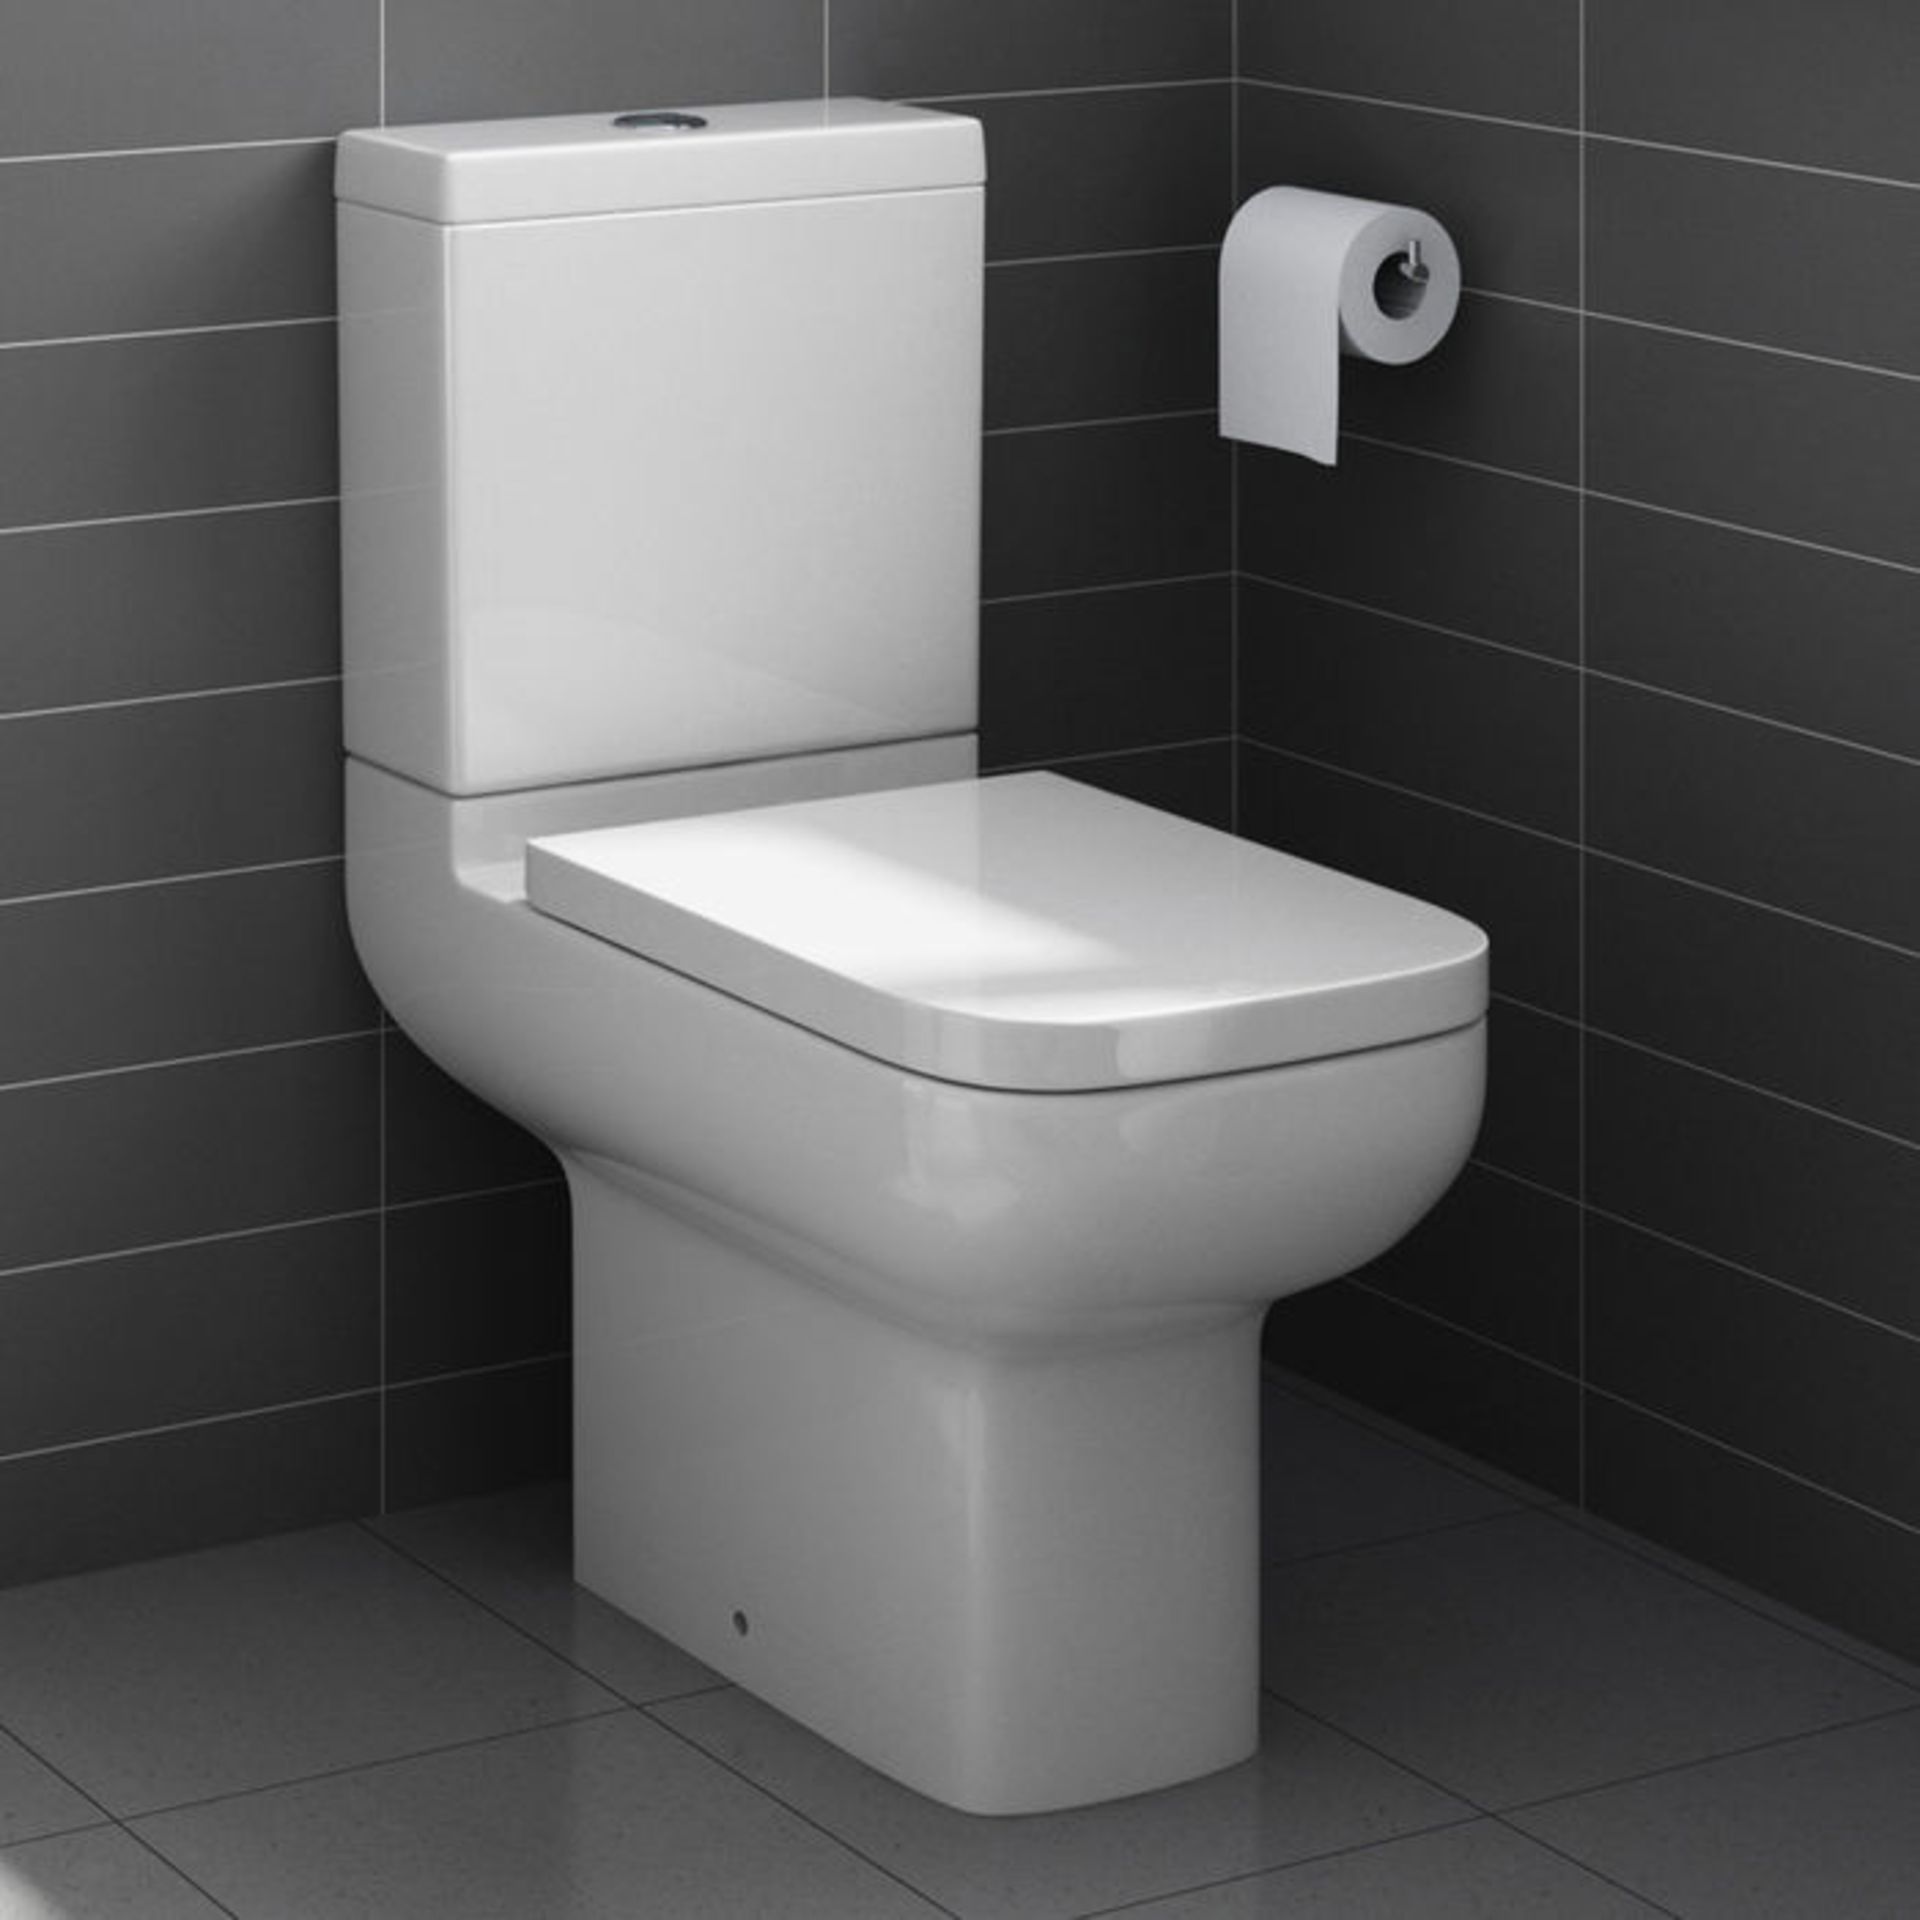 (AL22) Short Projection Close Coupled Toilet & Cistern inc Soft Close Seat. We love this because the